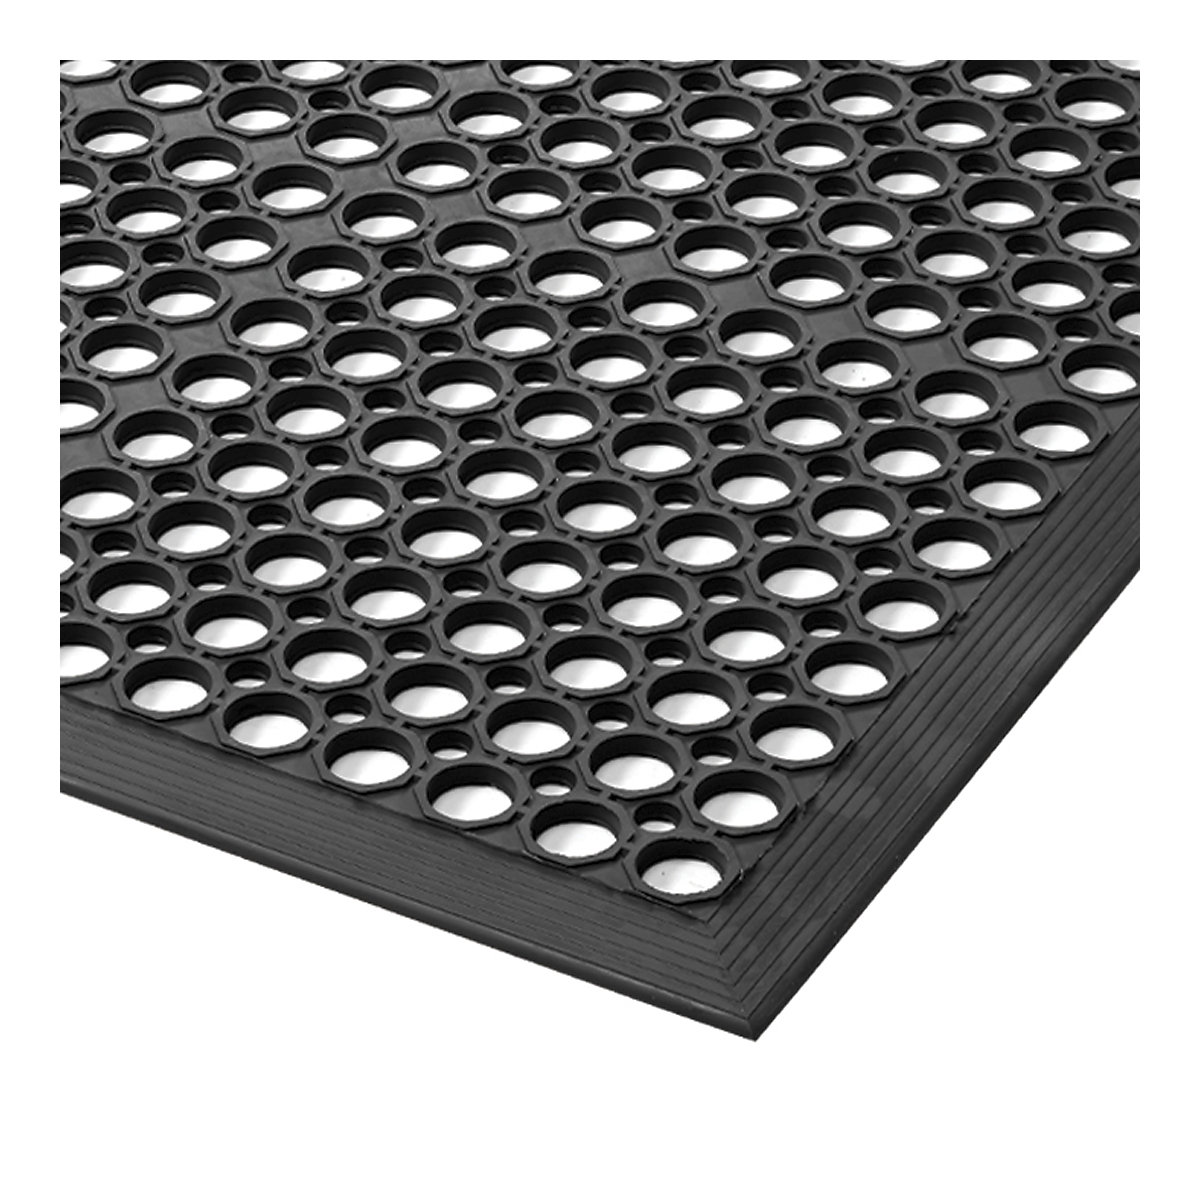 Sanitop perforated workstation matting – NOTRAX